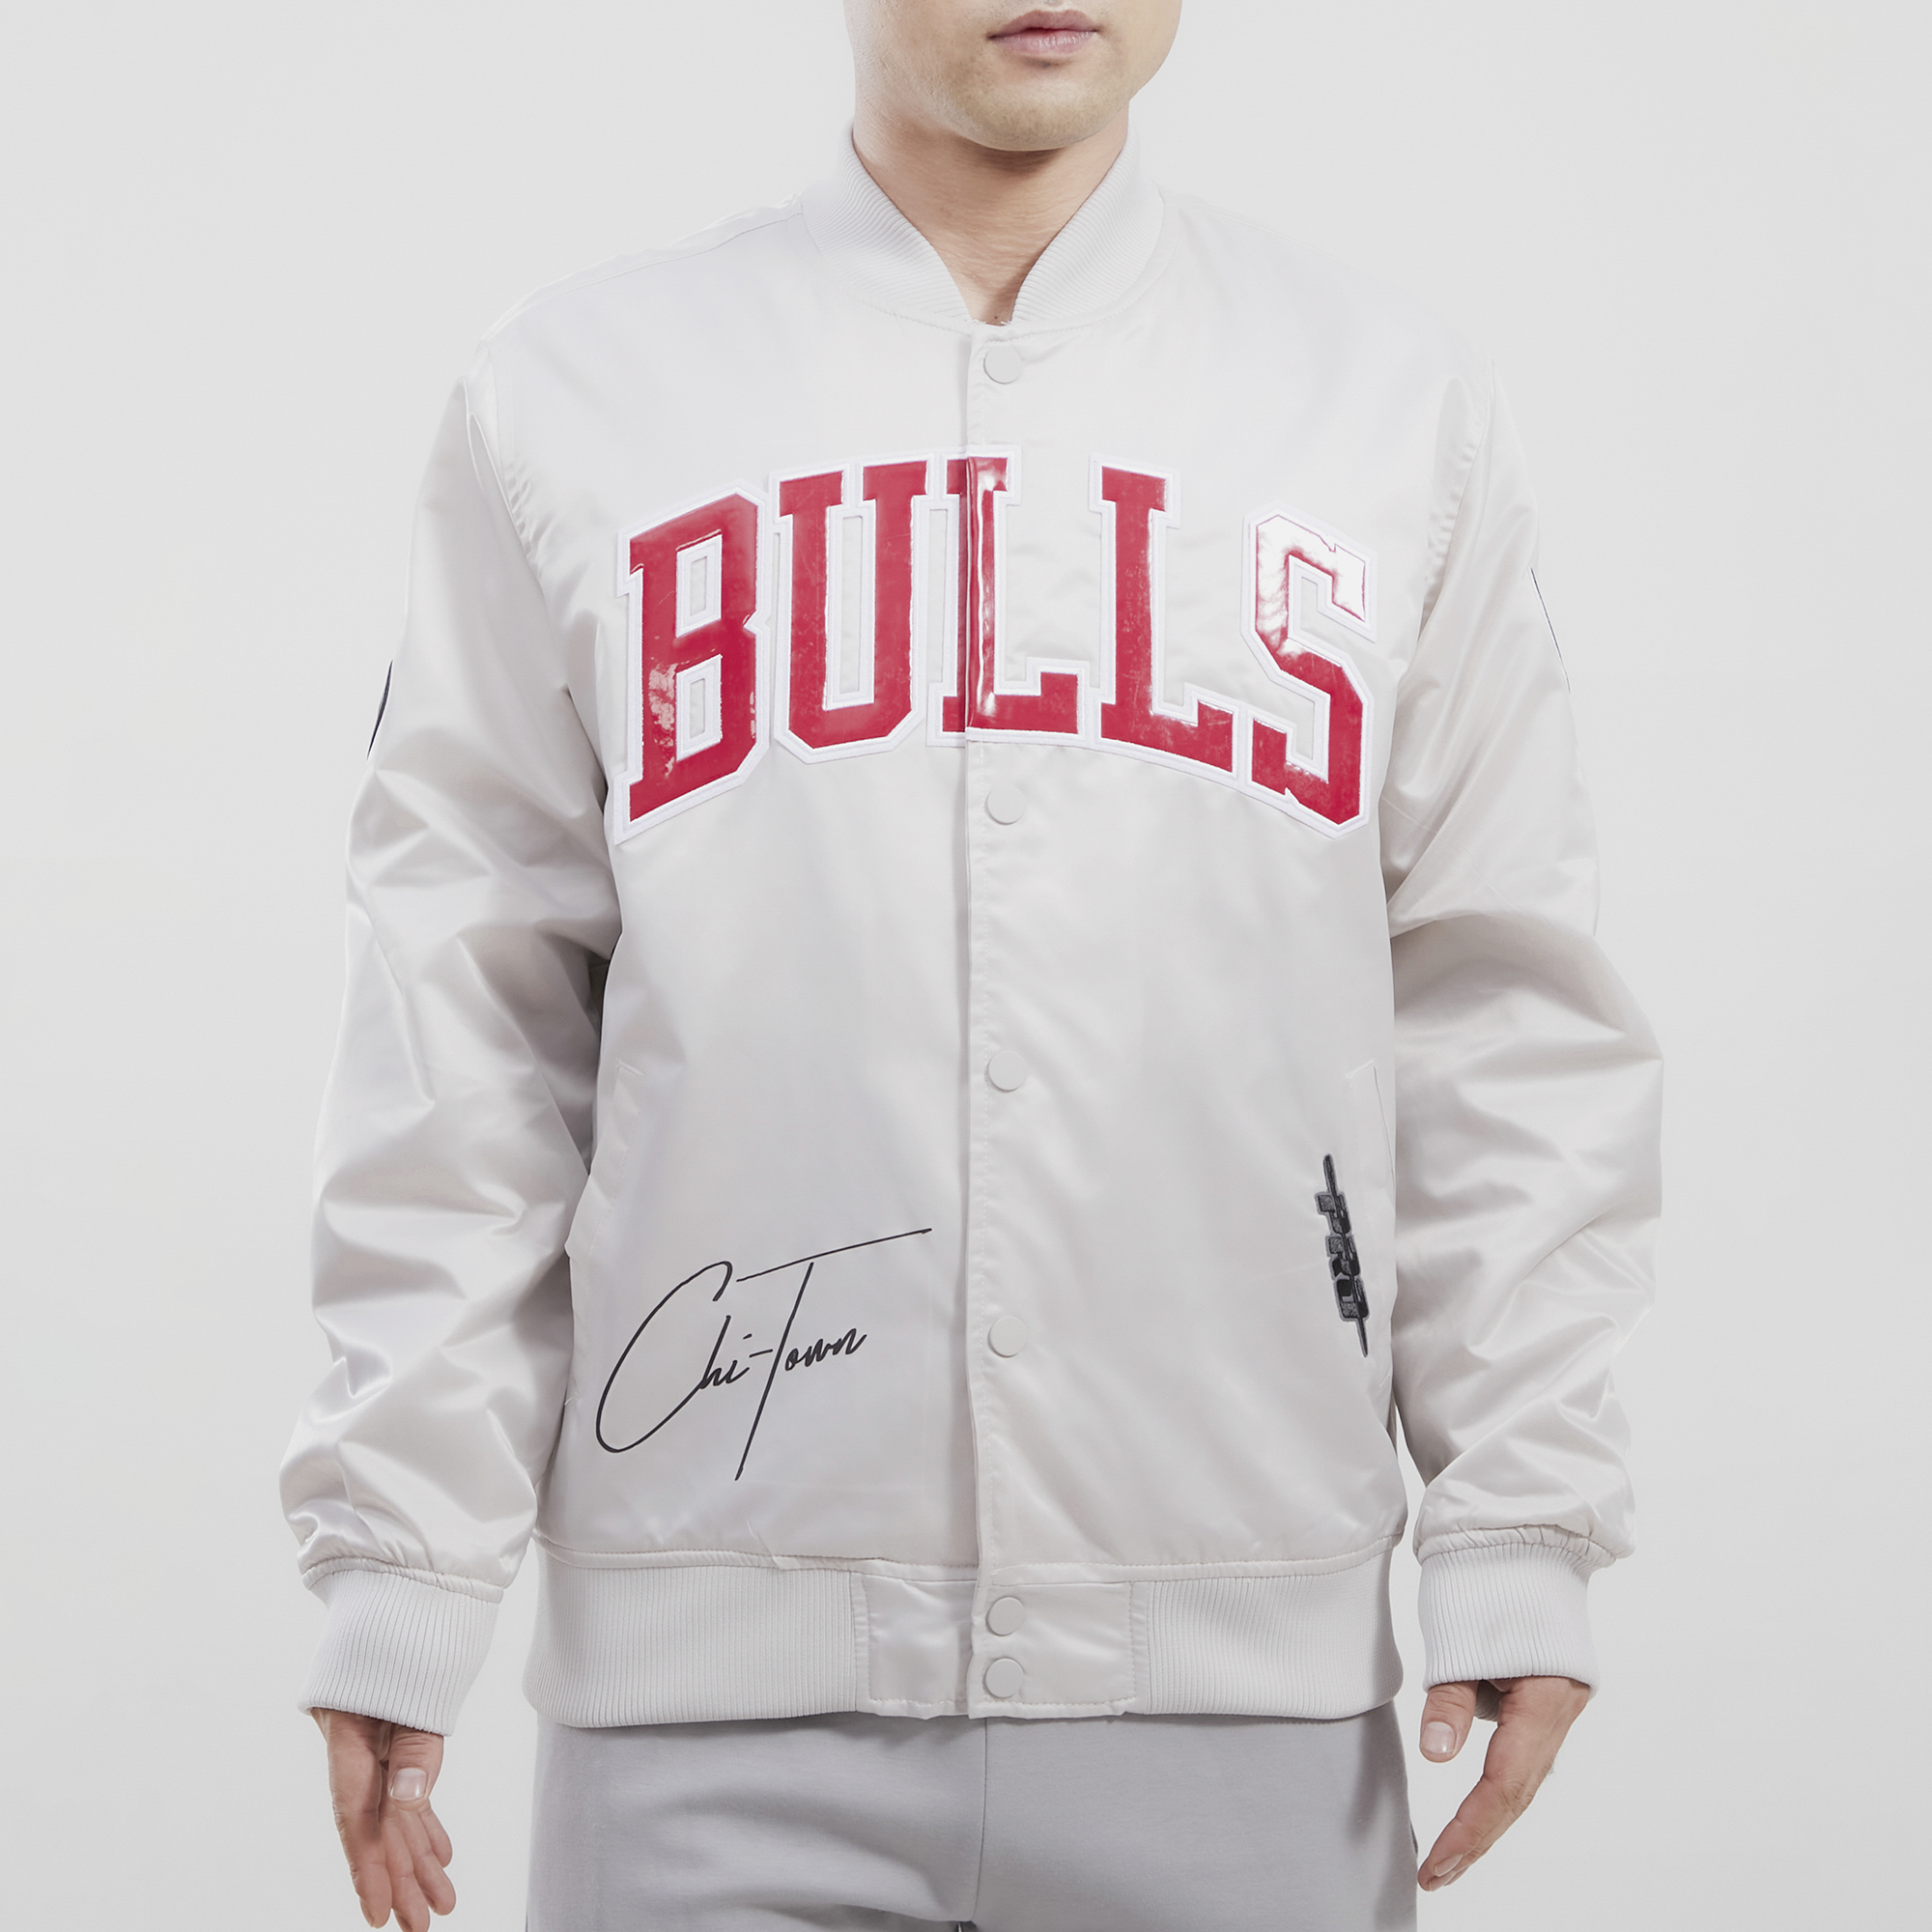 Silver Chicago Bulls NBA Jackets for sale